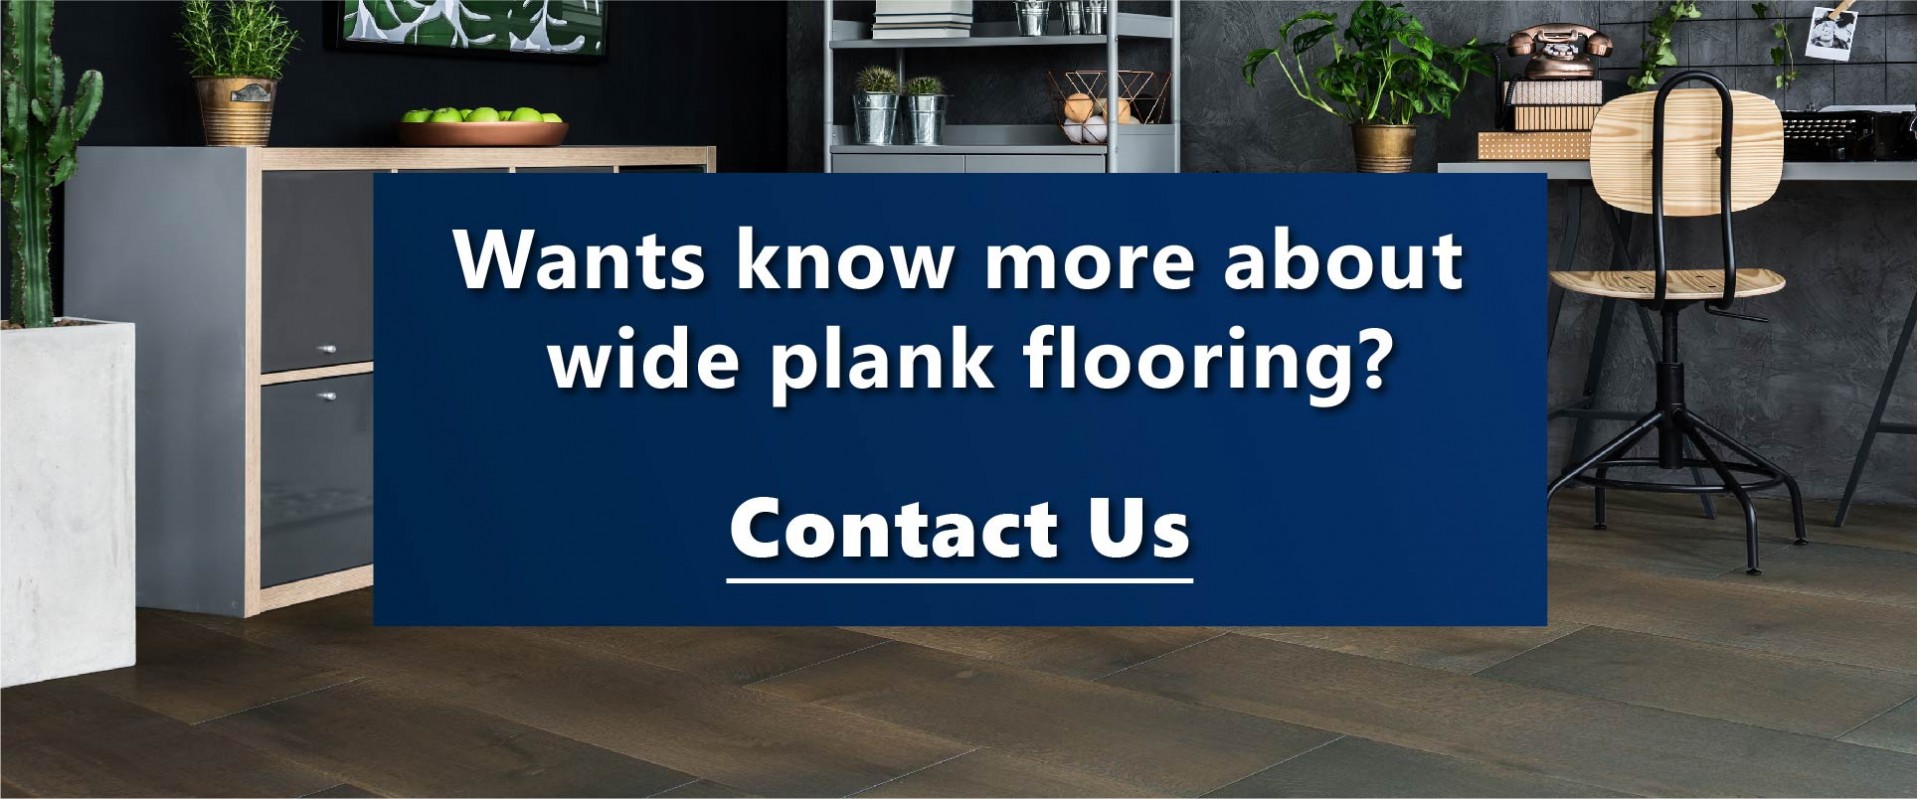 Contact Us to know more about Engineered Hardwood Flooring